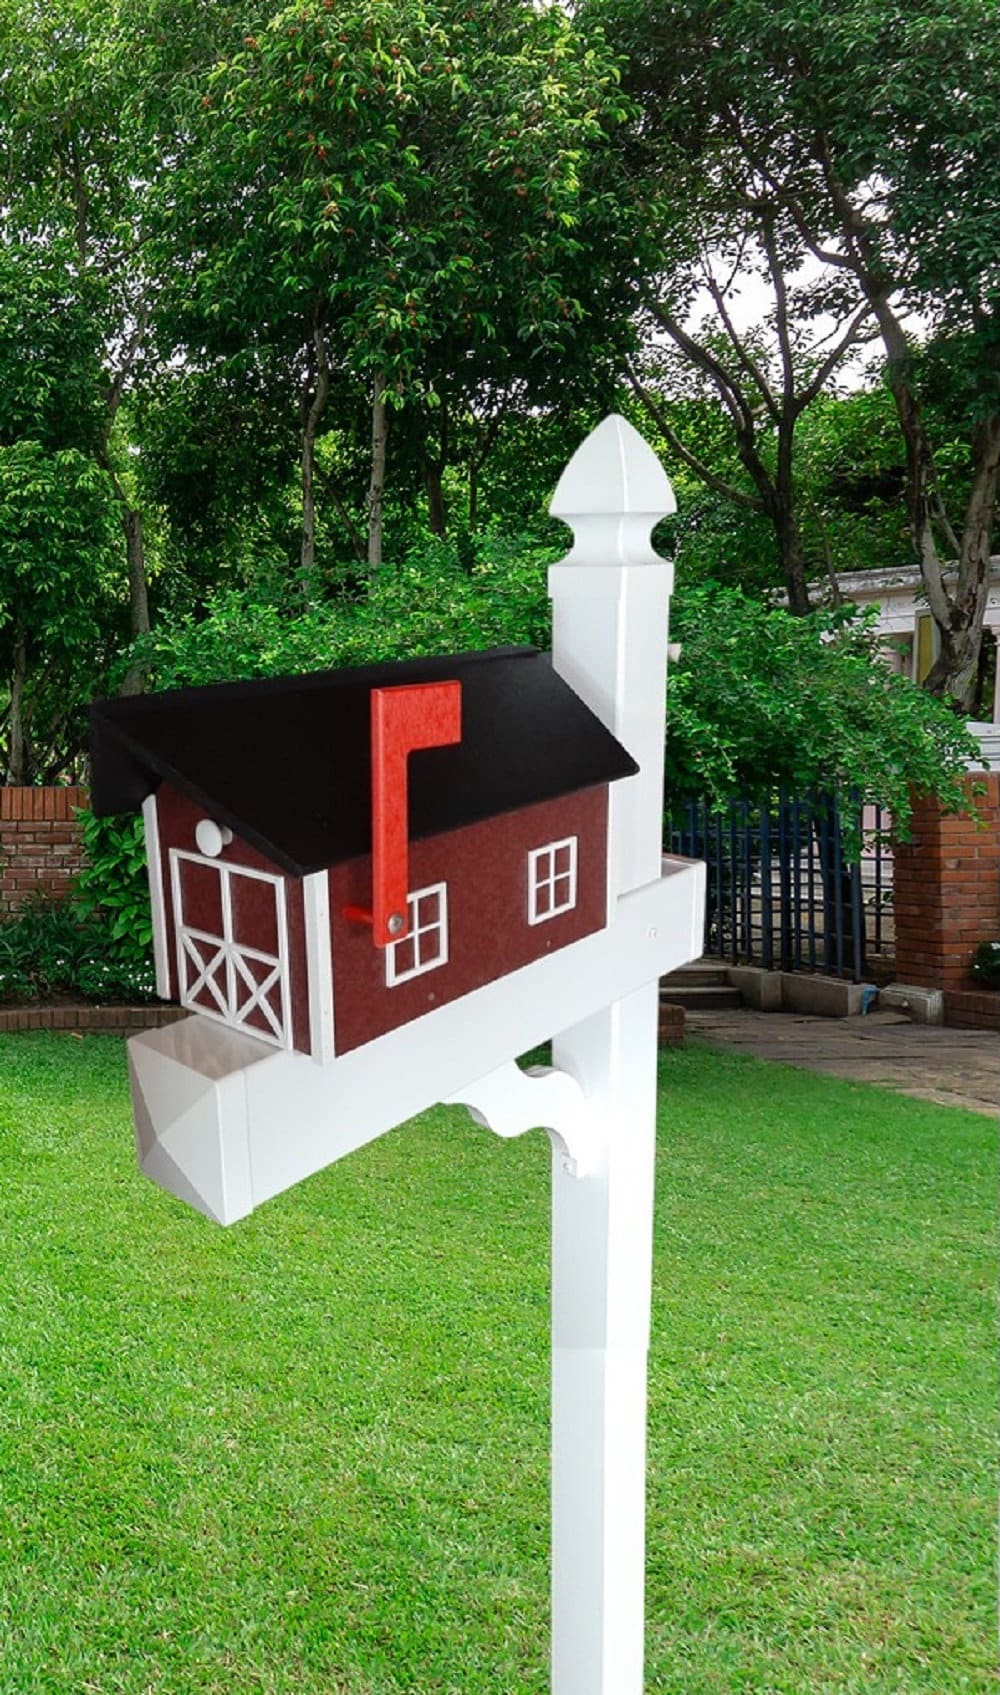 Amish Mailbox - Handmade - Poly Lumber Barn Style - Black Roof, Red Box With White Trim - Weather Resistant